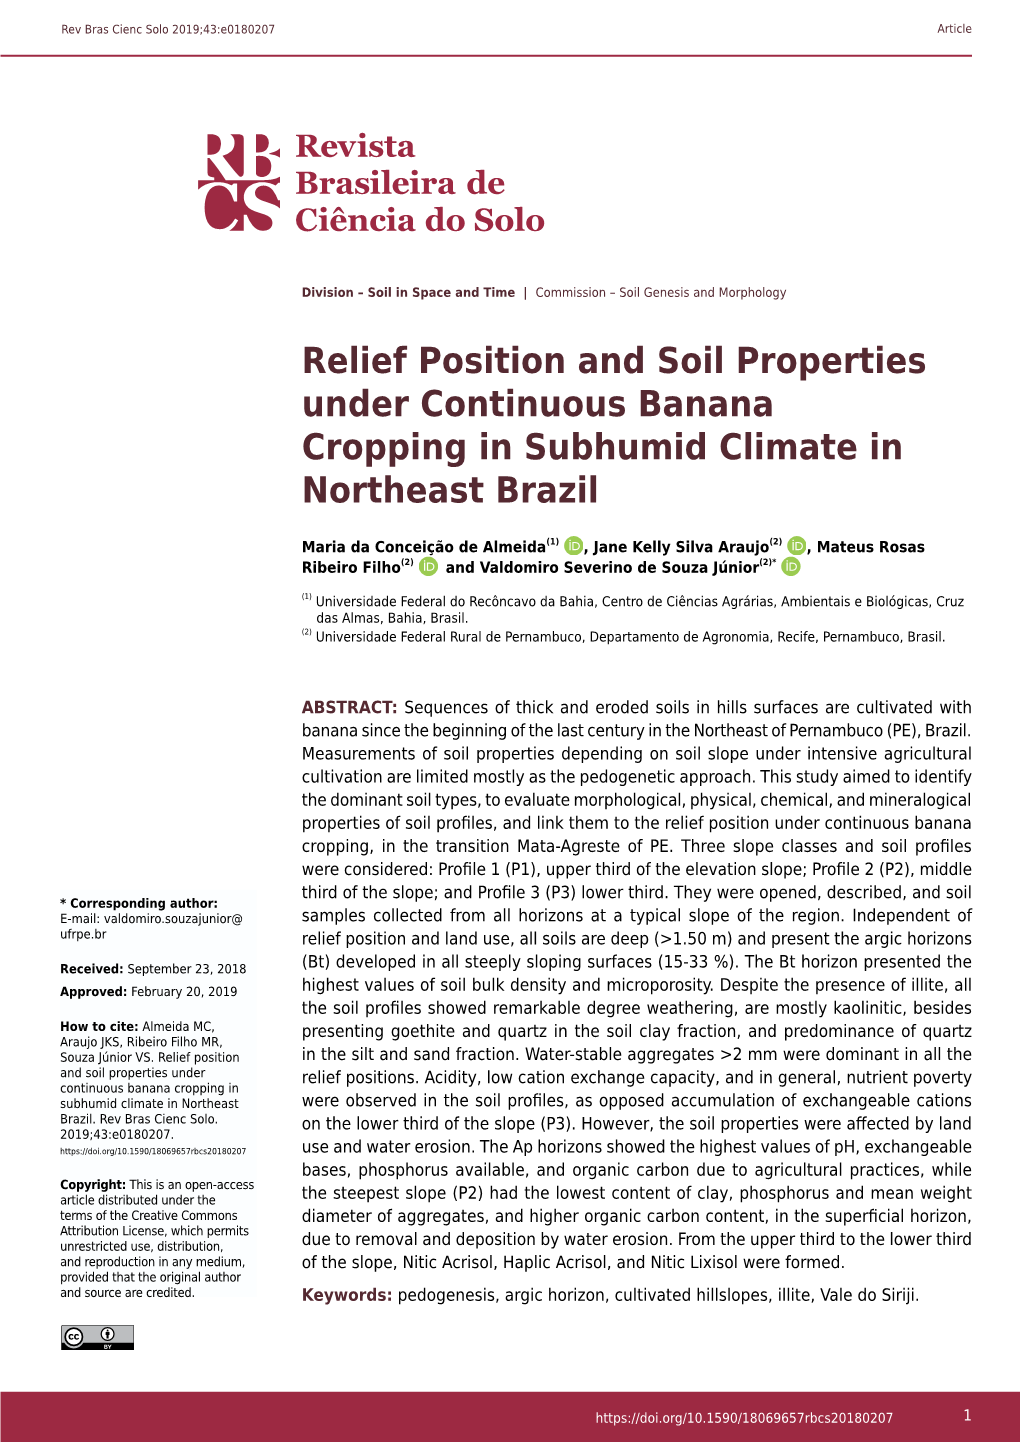 Relief Position and Soil Properties Under Continuous Banana Cropping in Subhumid Climate in Northeast Brazil